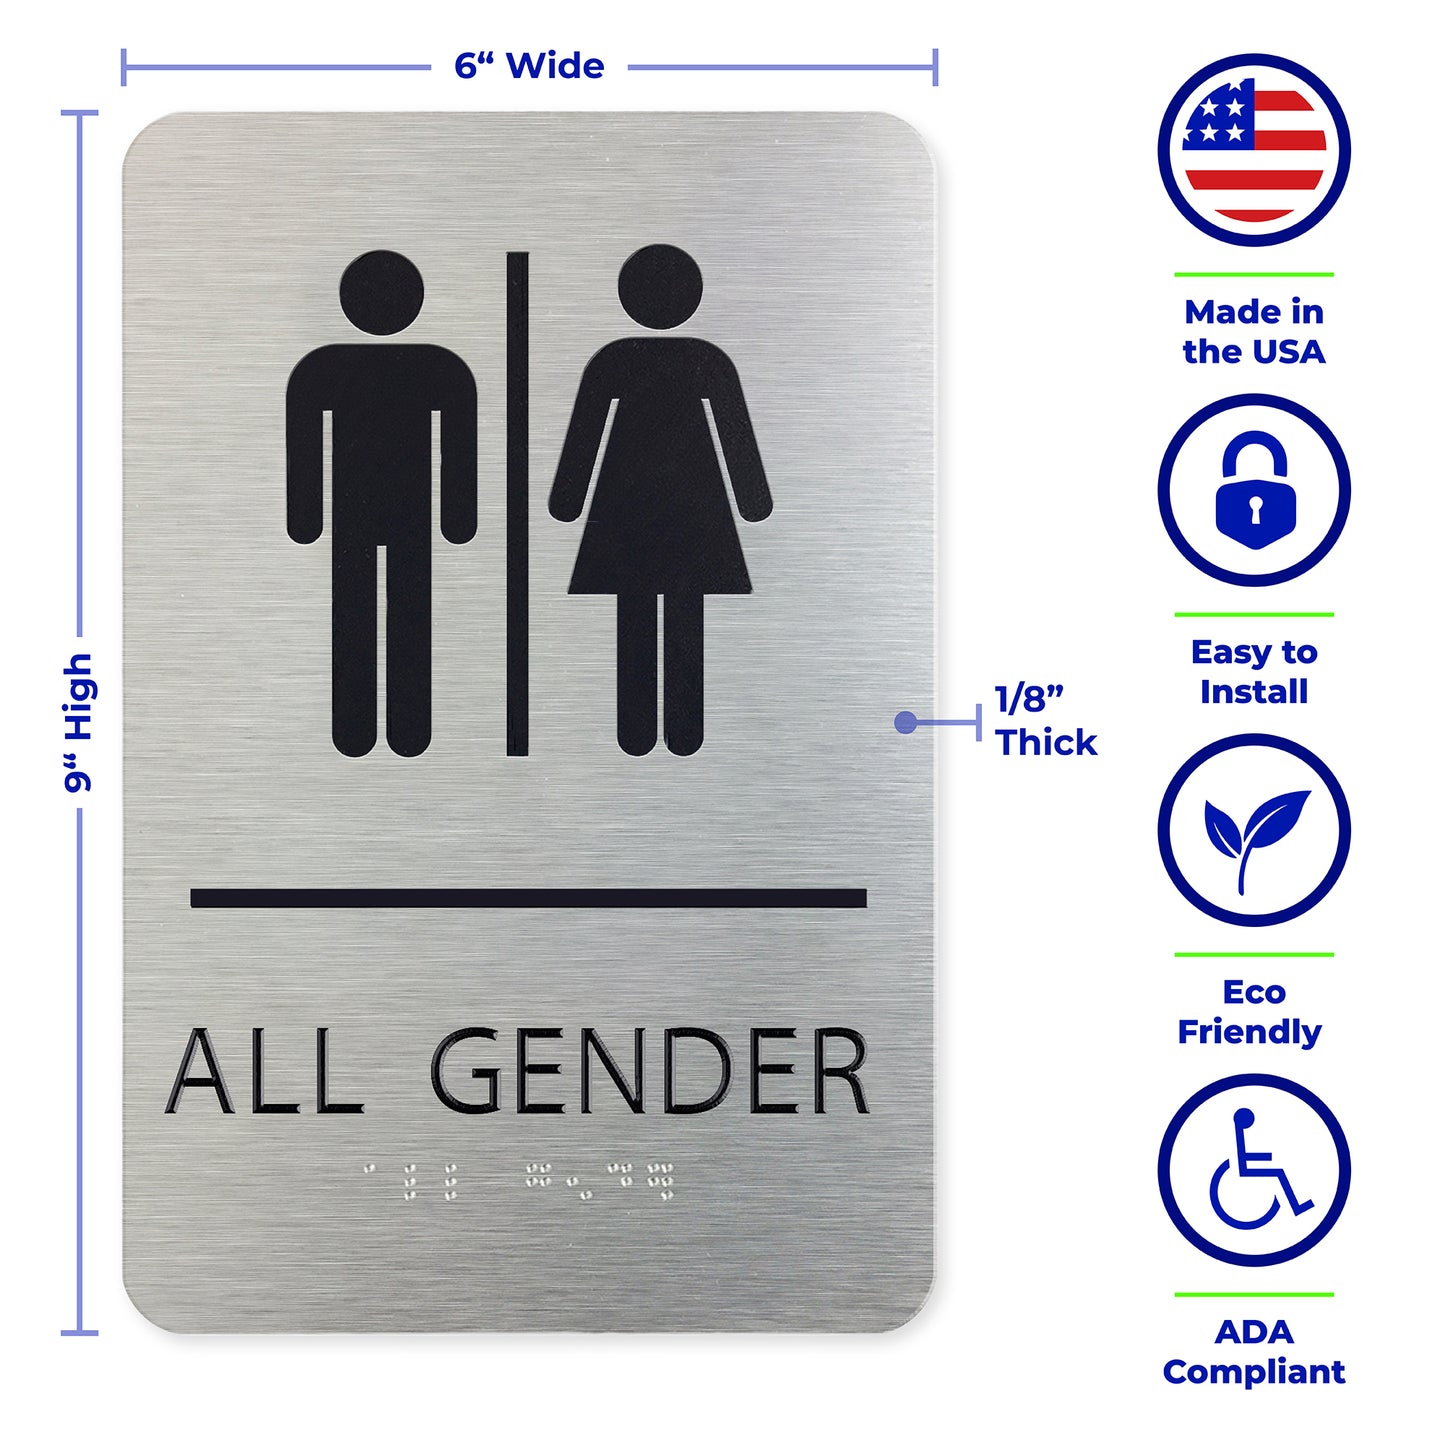 ALL GENDER Restroom Sign with Man & Woman Symbols, Non Accessible, Brushed Silver, Black Raised Text, Grade II Braille, 6"x9"